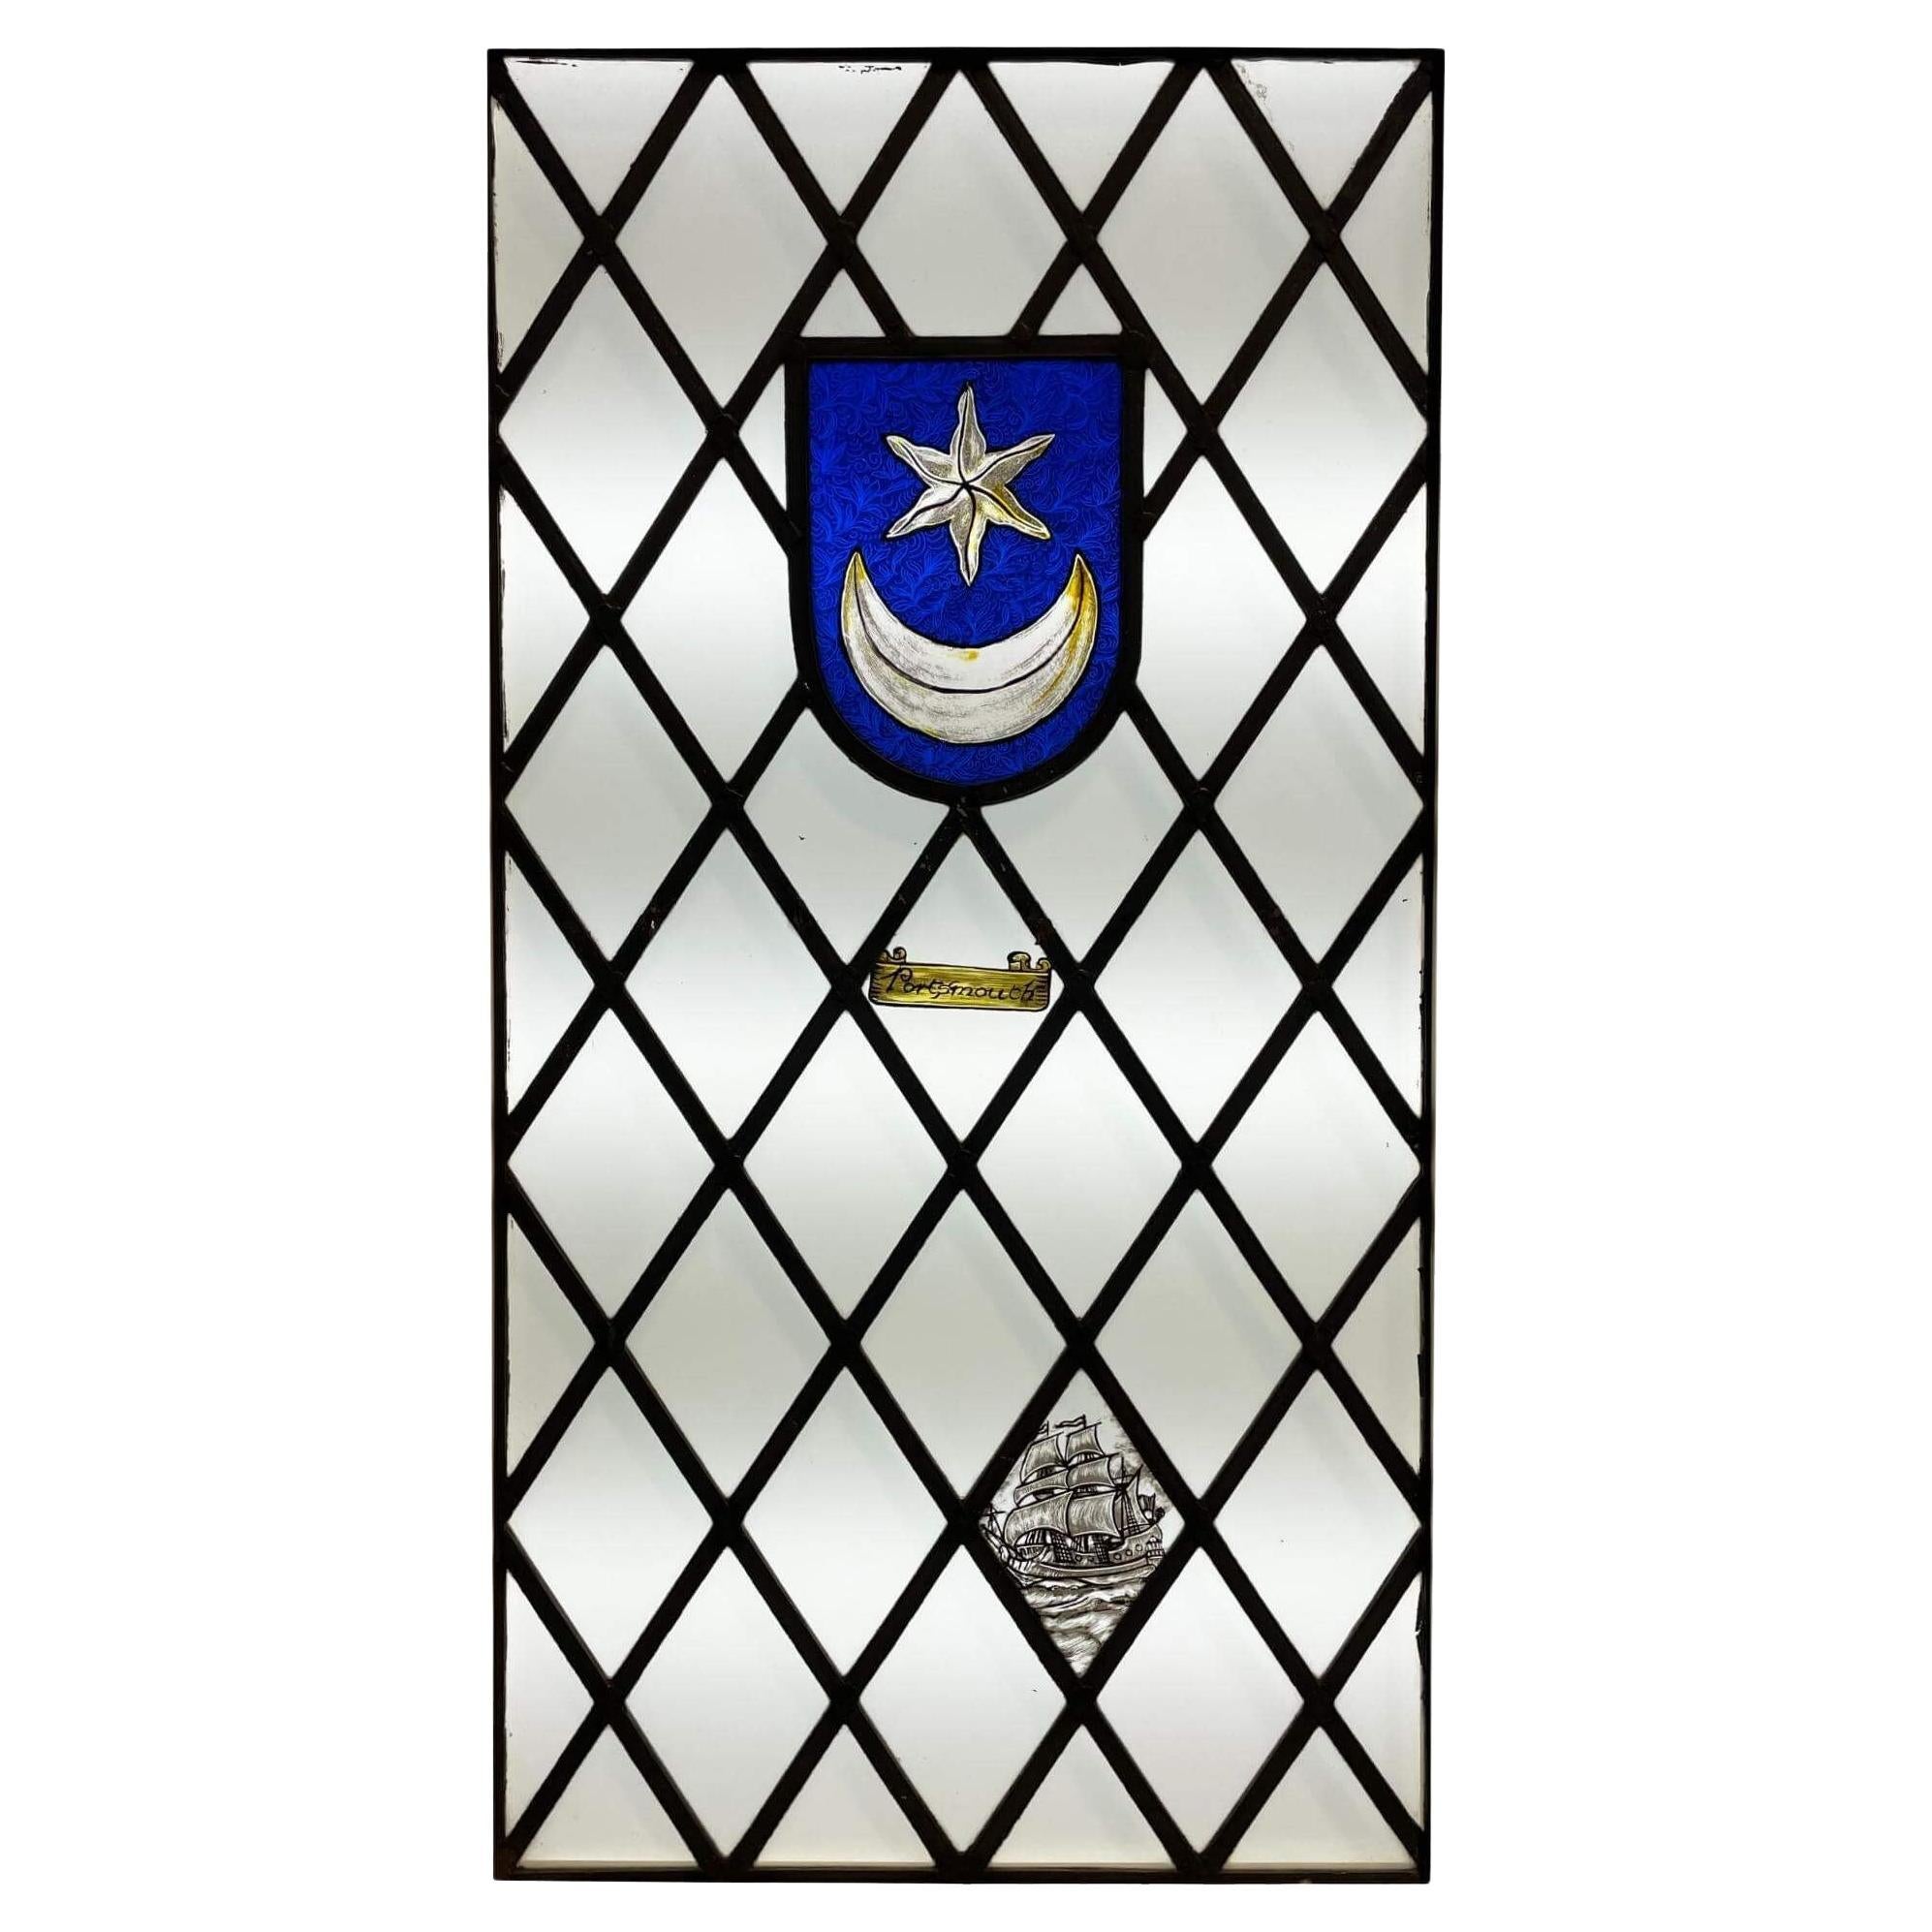 ‘Portsmouth’ Antique Stained Glass Window For Sale